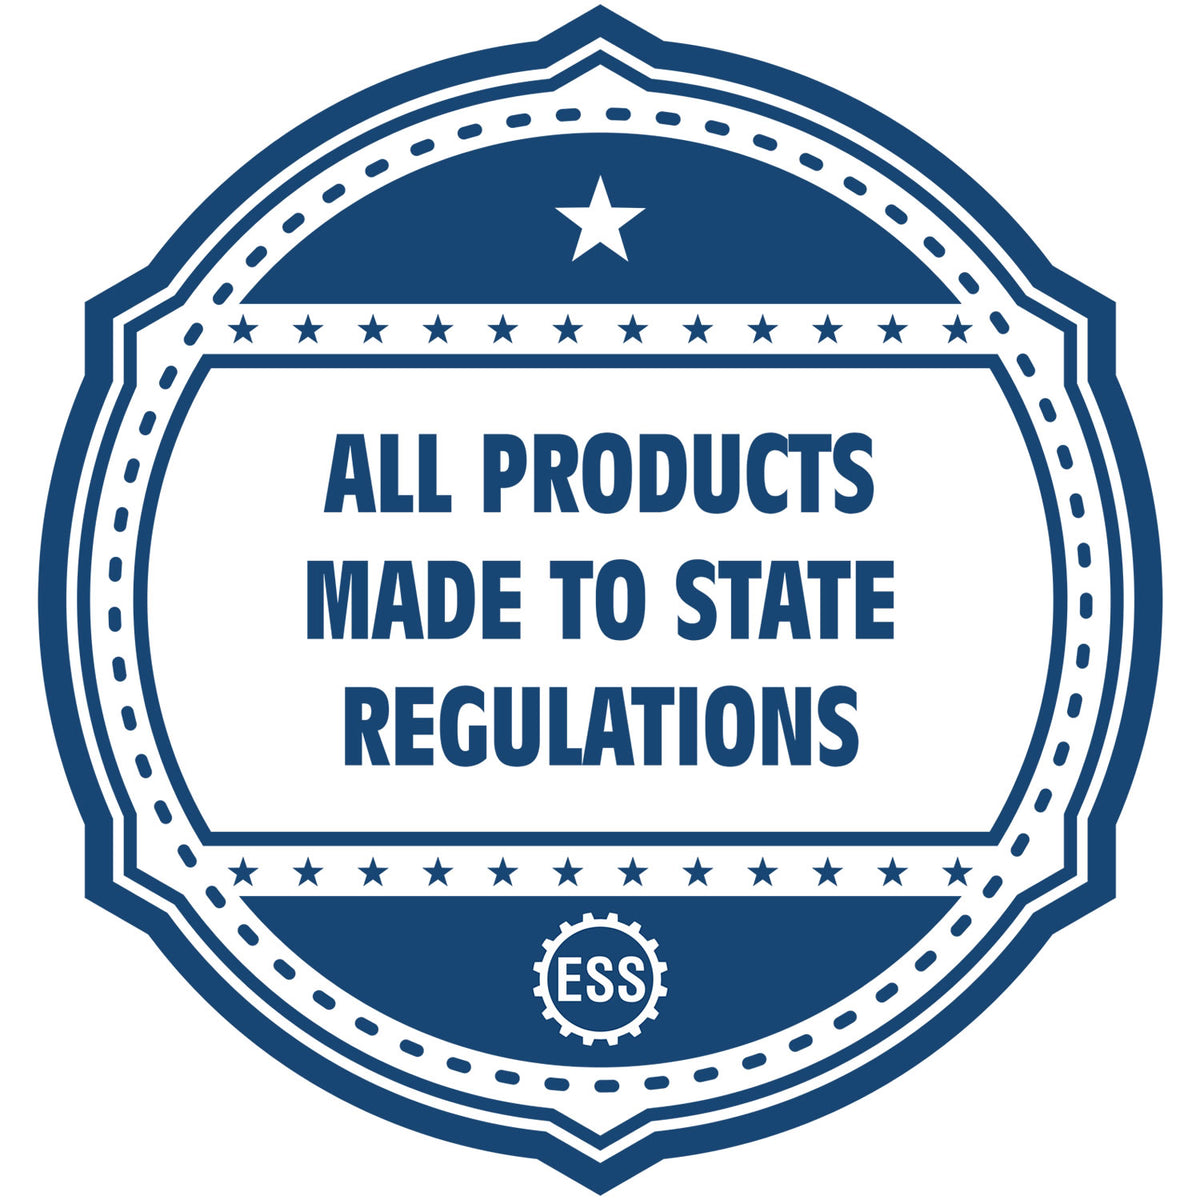 An icon or badge element for the Handheld Montana Land Surveyor Seal showing that this product is made in compliance with state regulations.